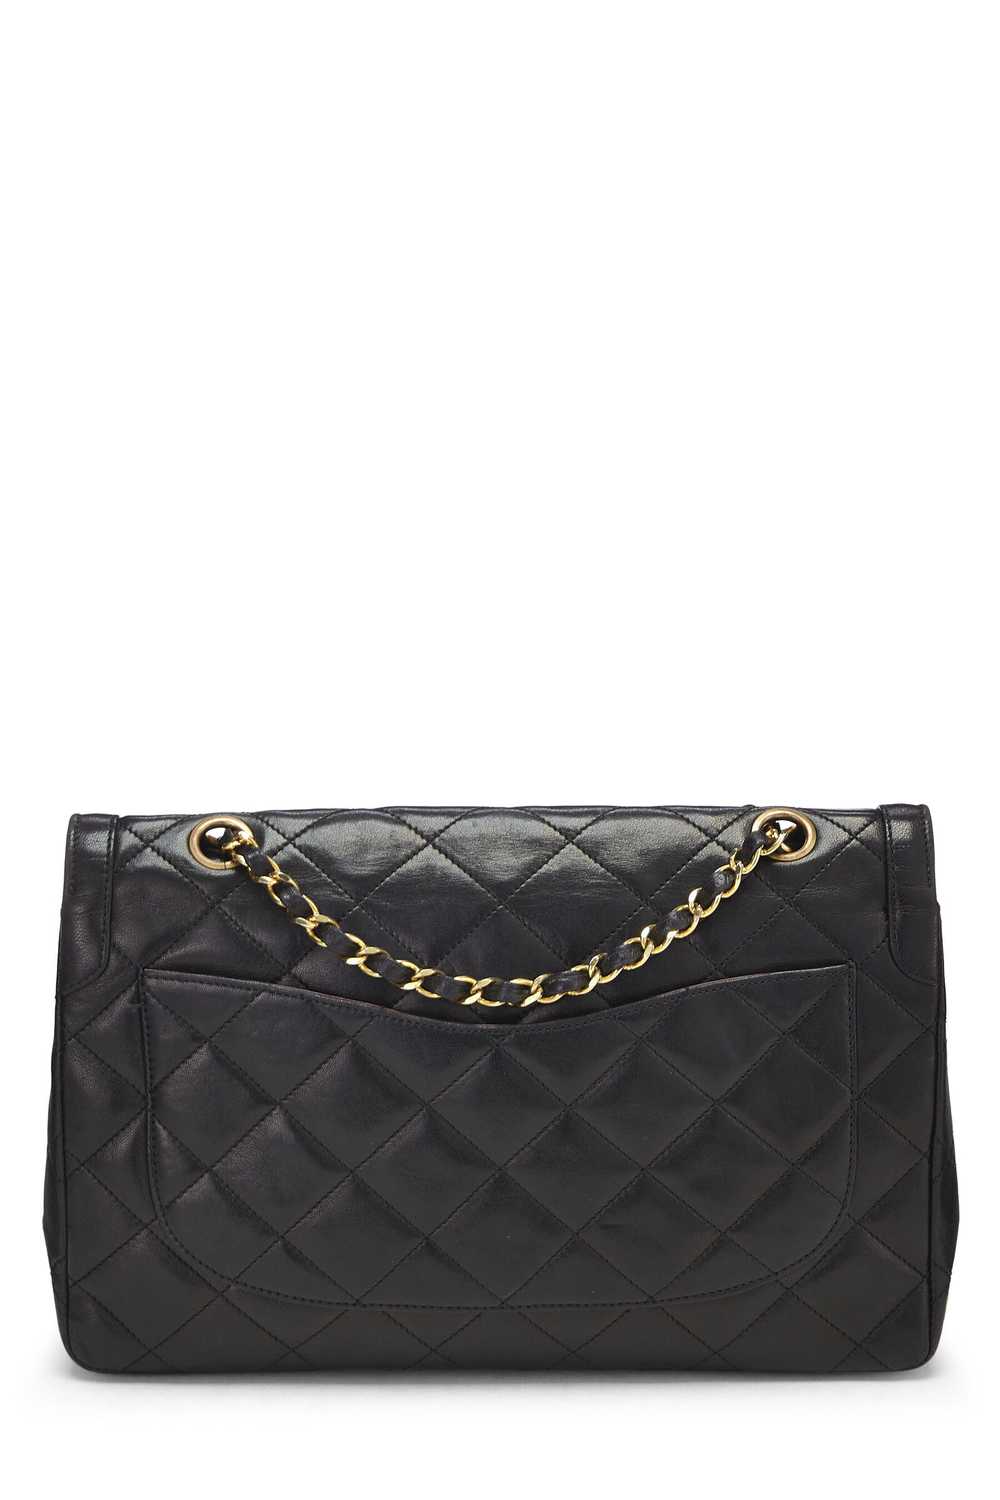 Black Quilted Lambskin Paris Limited Double Flap … - image 4